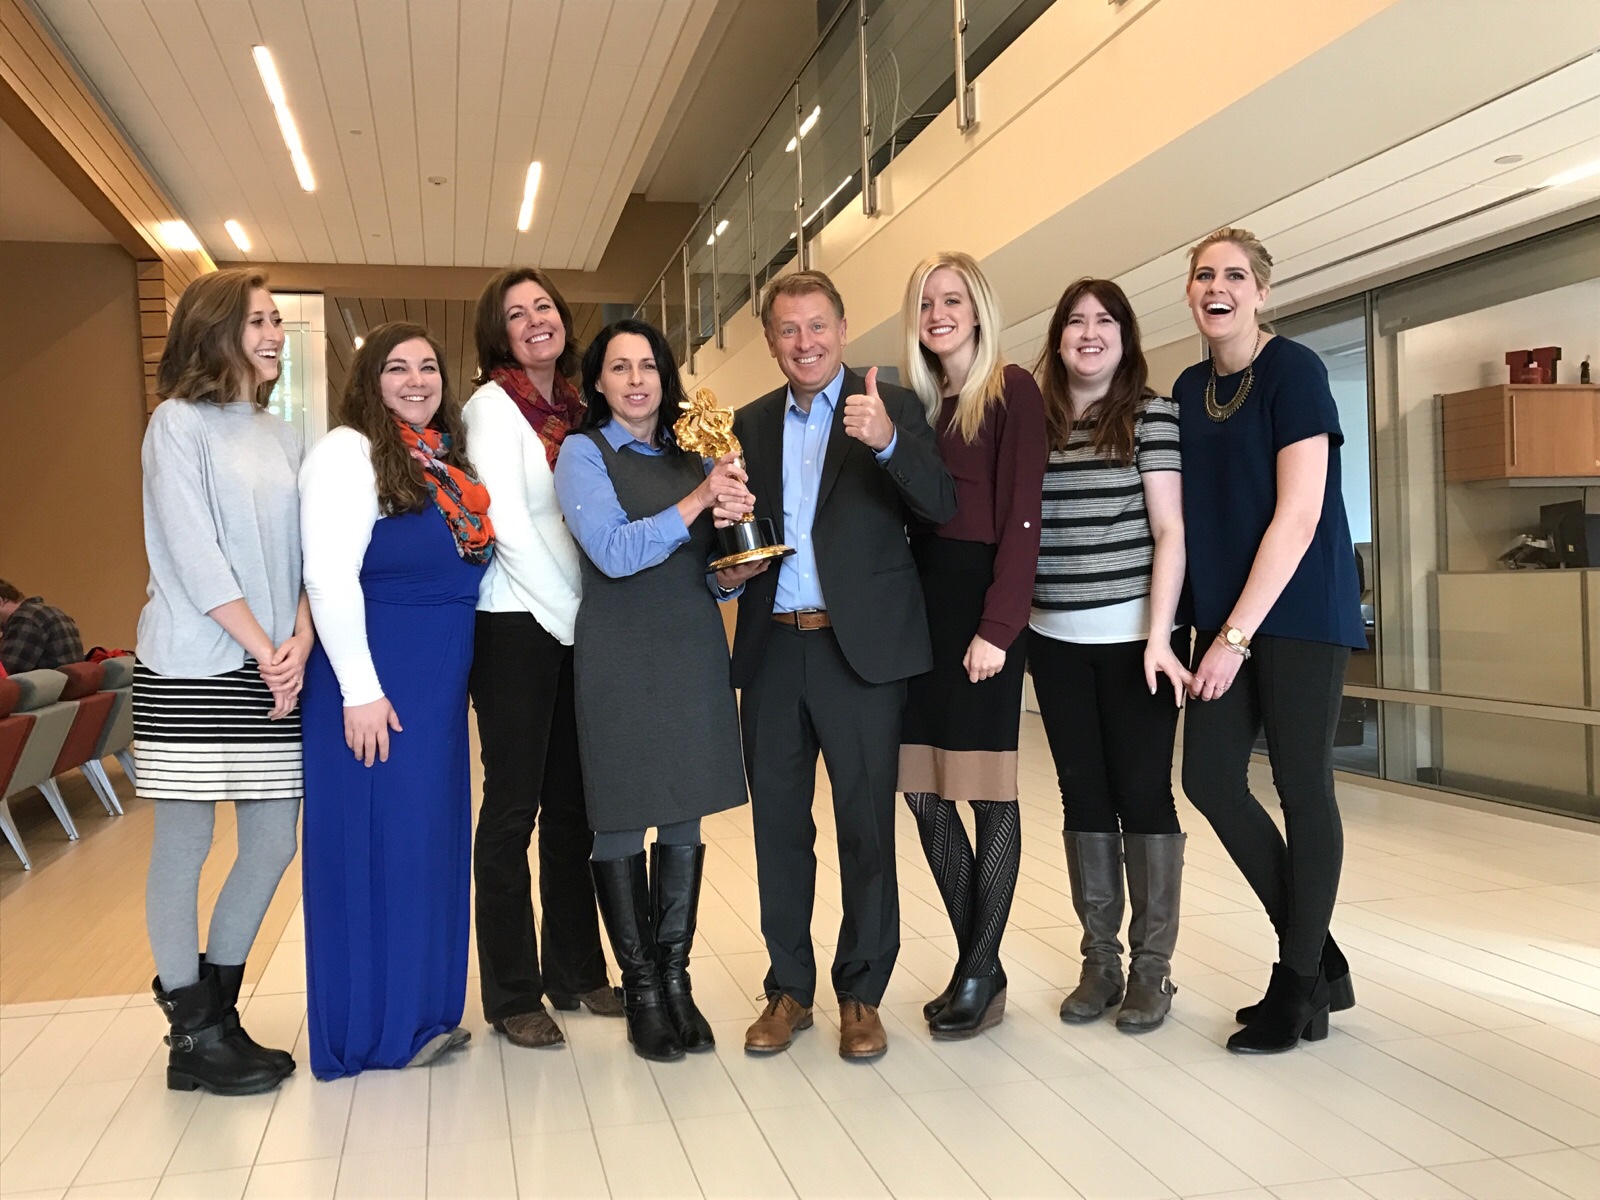 Full-Time MBA team receives the Eldredge Excellence Award